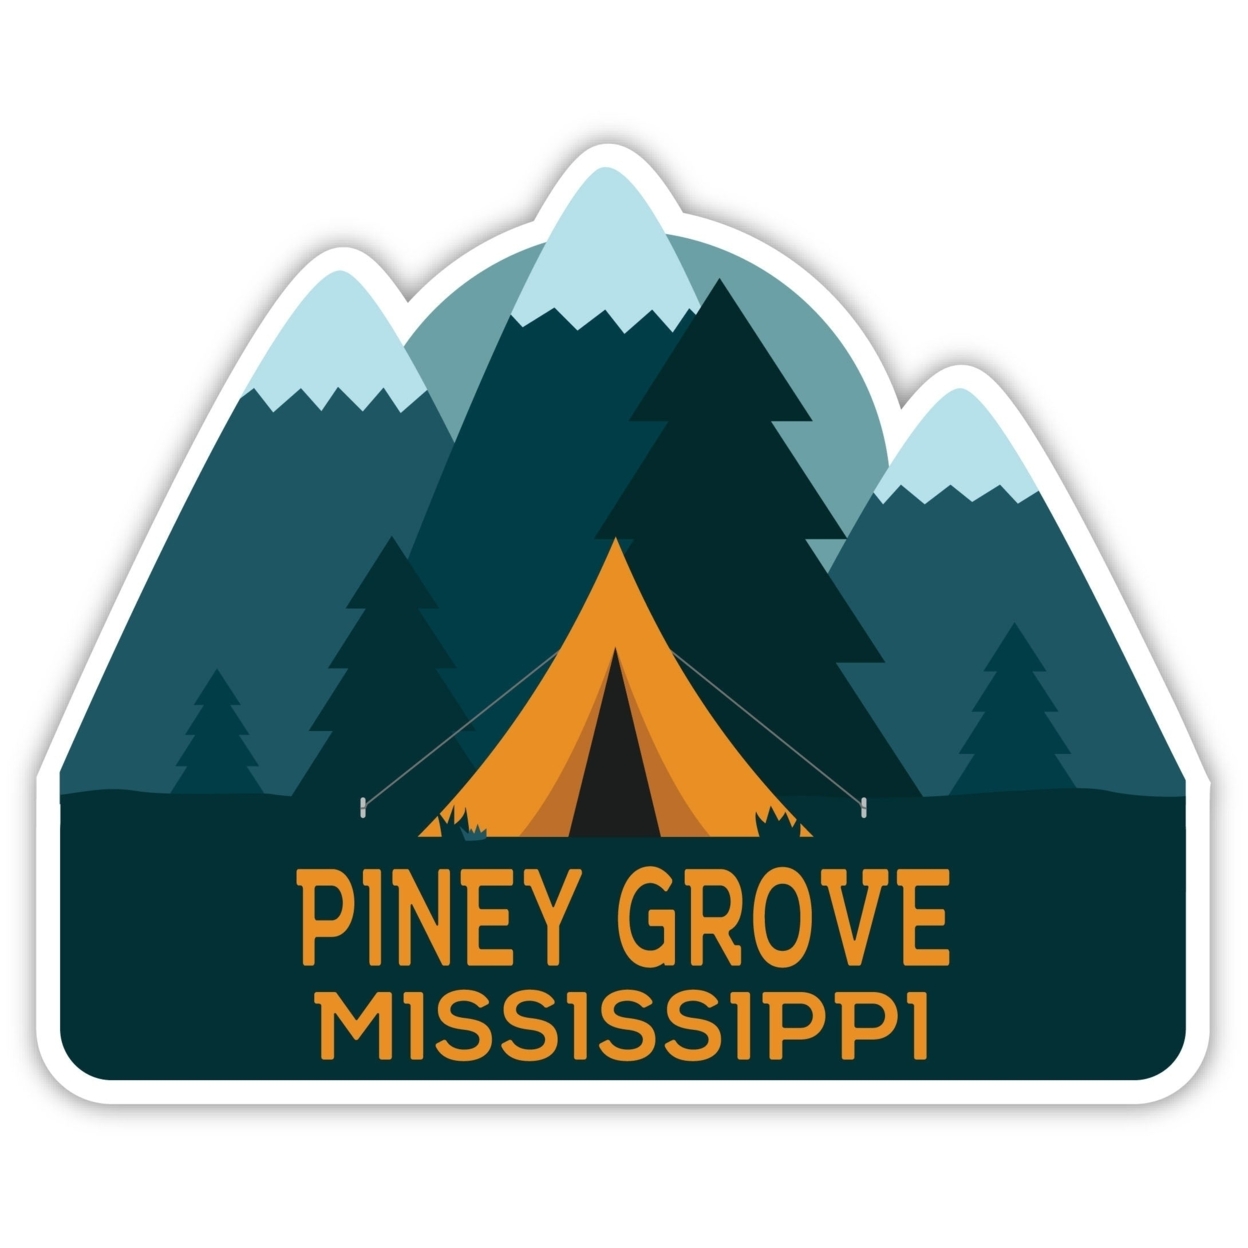 Piney Grove Mississippi Souvenir Decorative Stickers (Choose Theme And Size) - Single Unit, 4-Inch, Tent